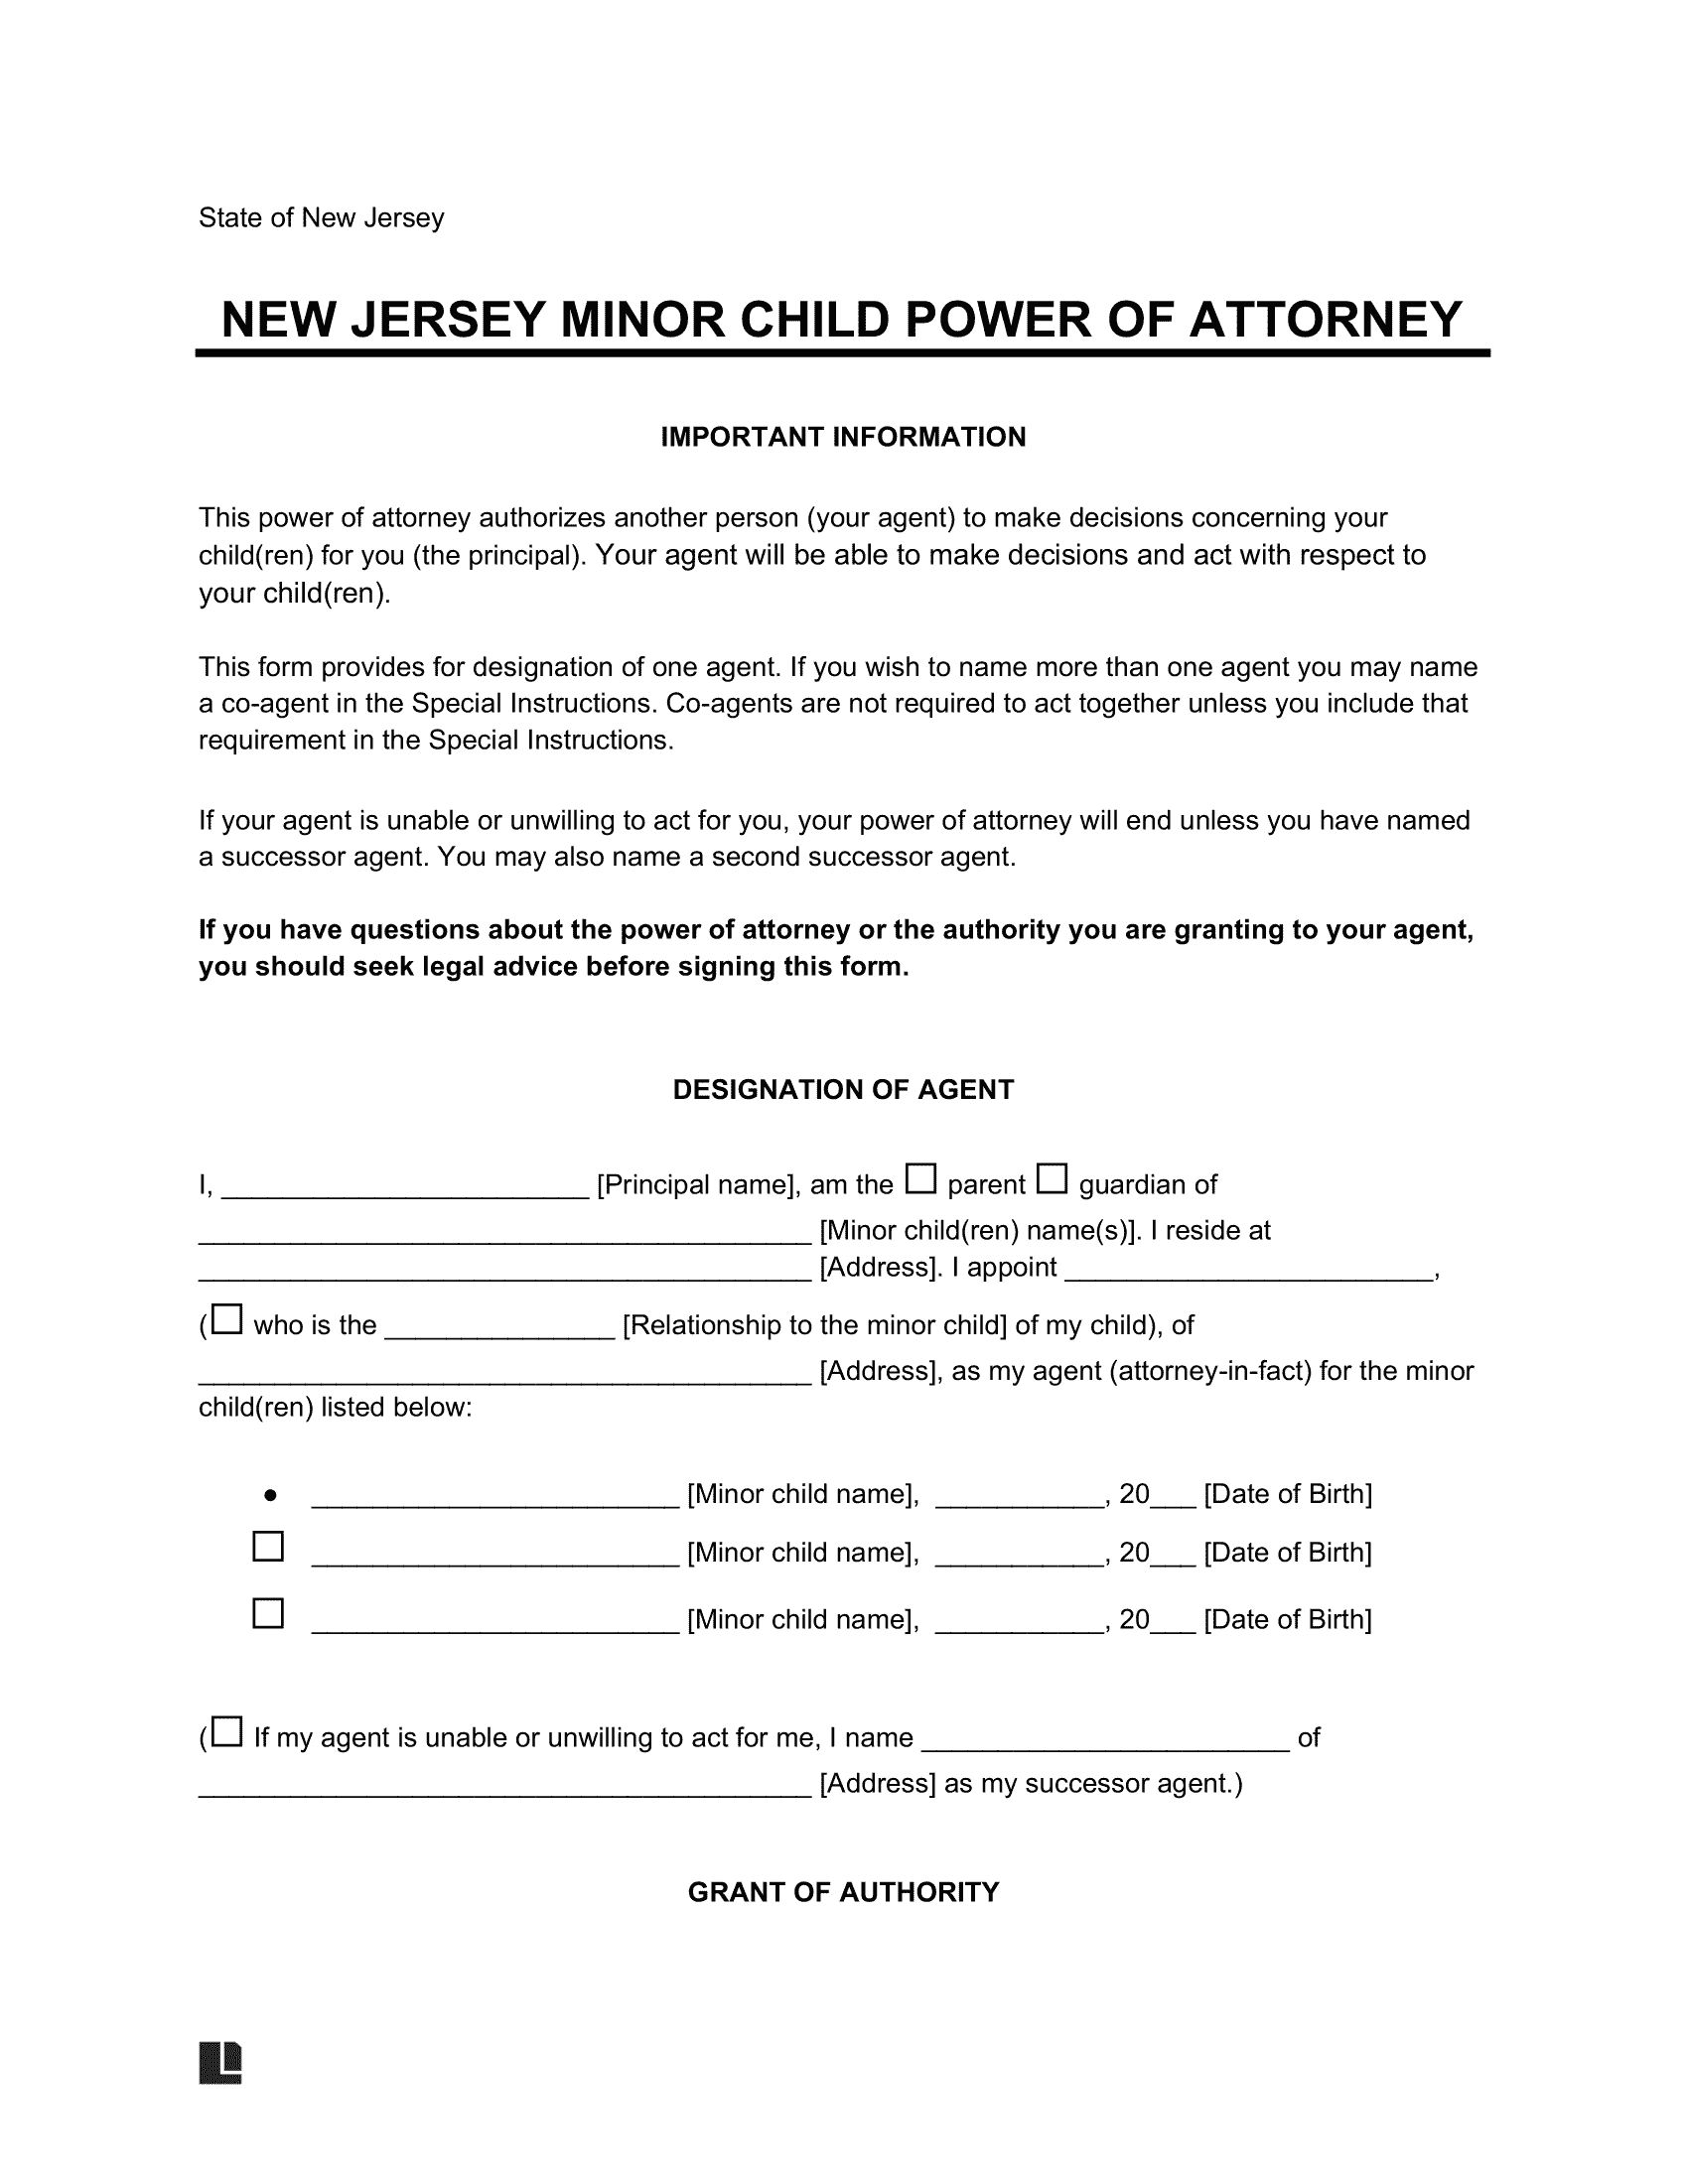 New Jersey Minor Child Power of Attorney Form